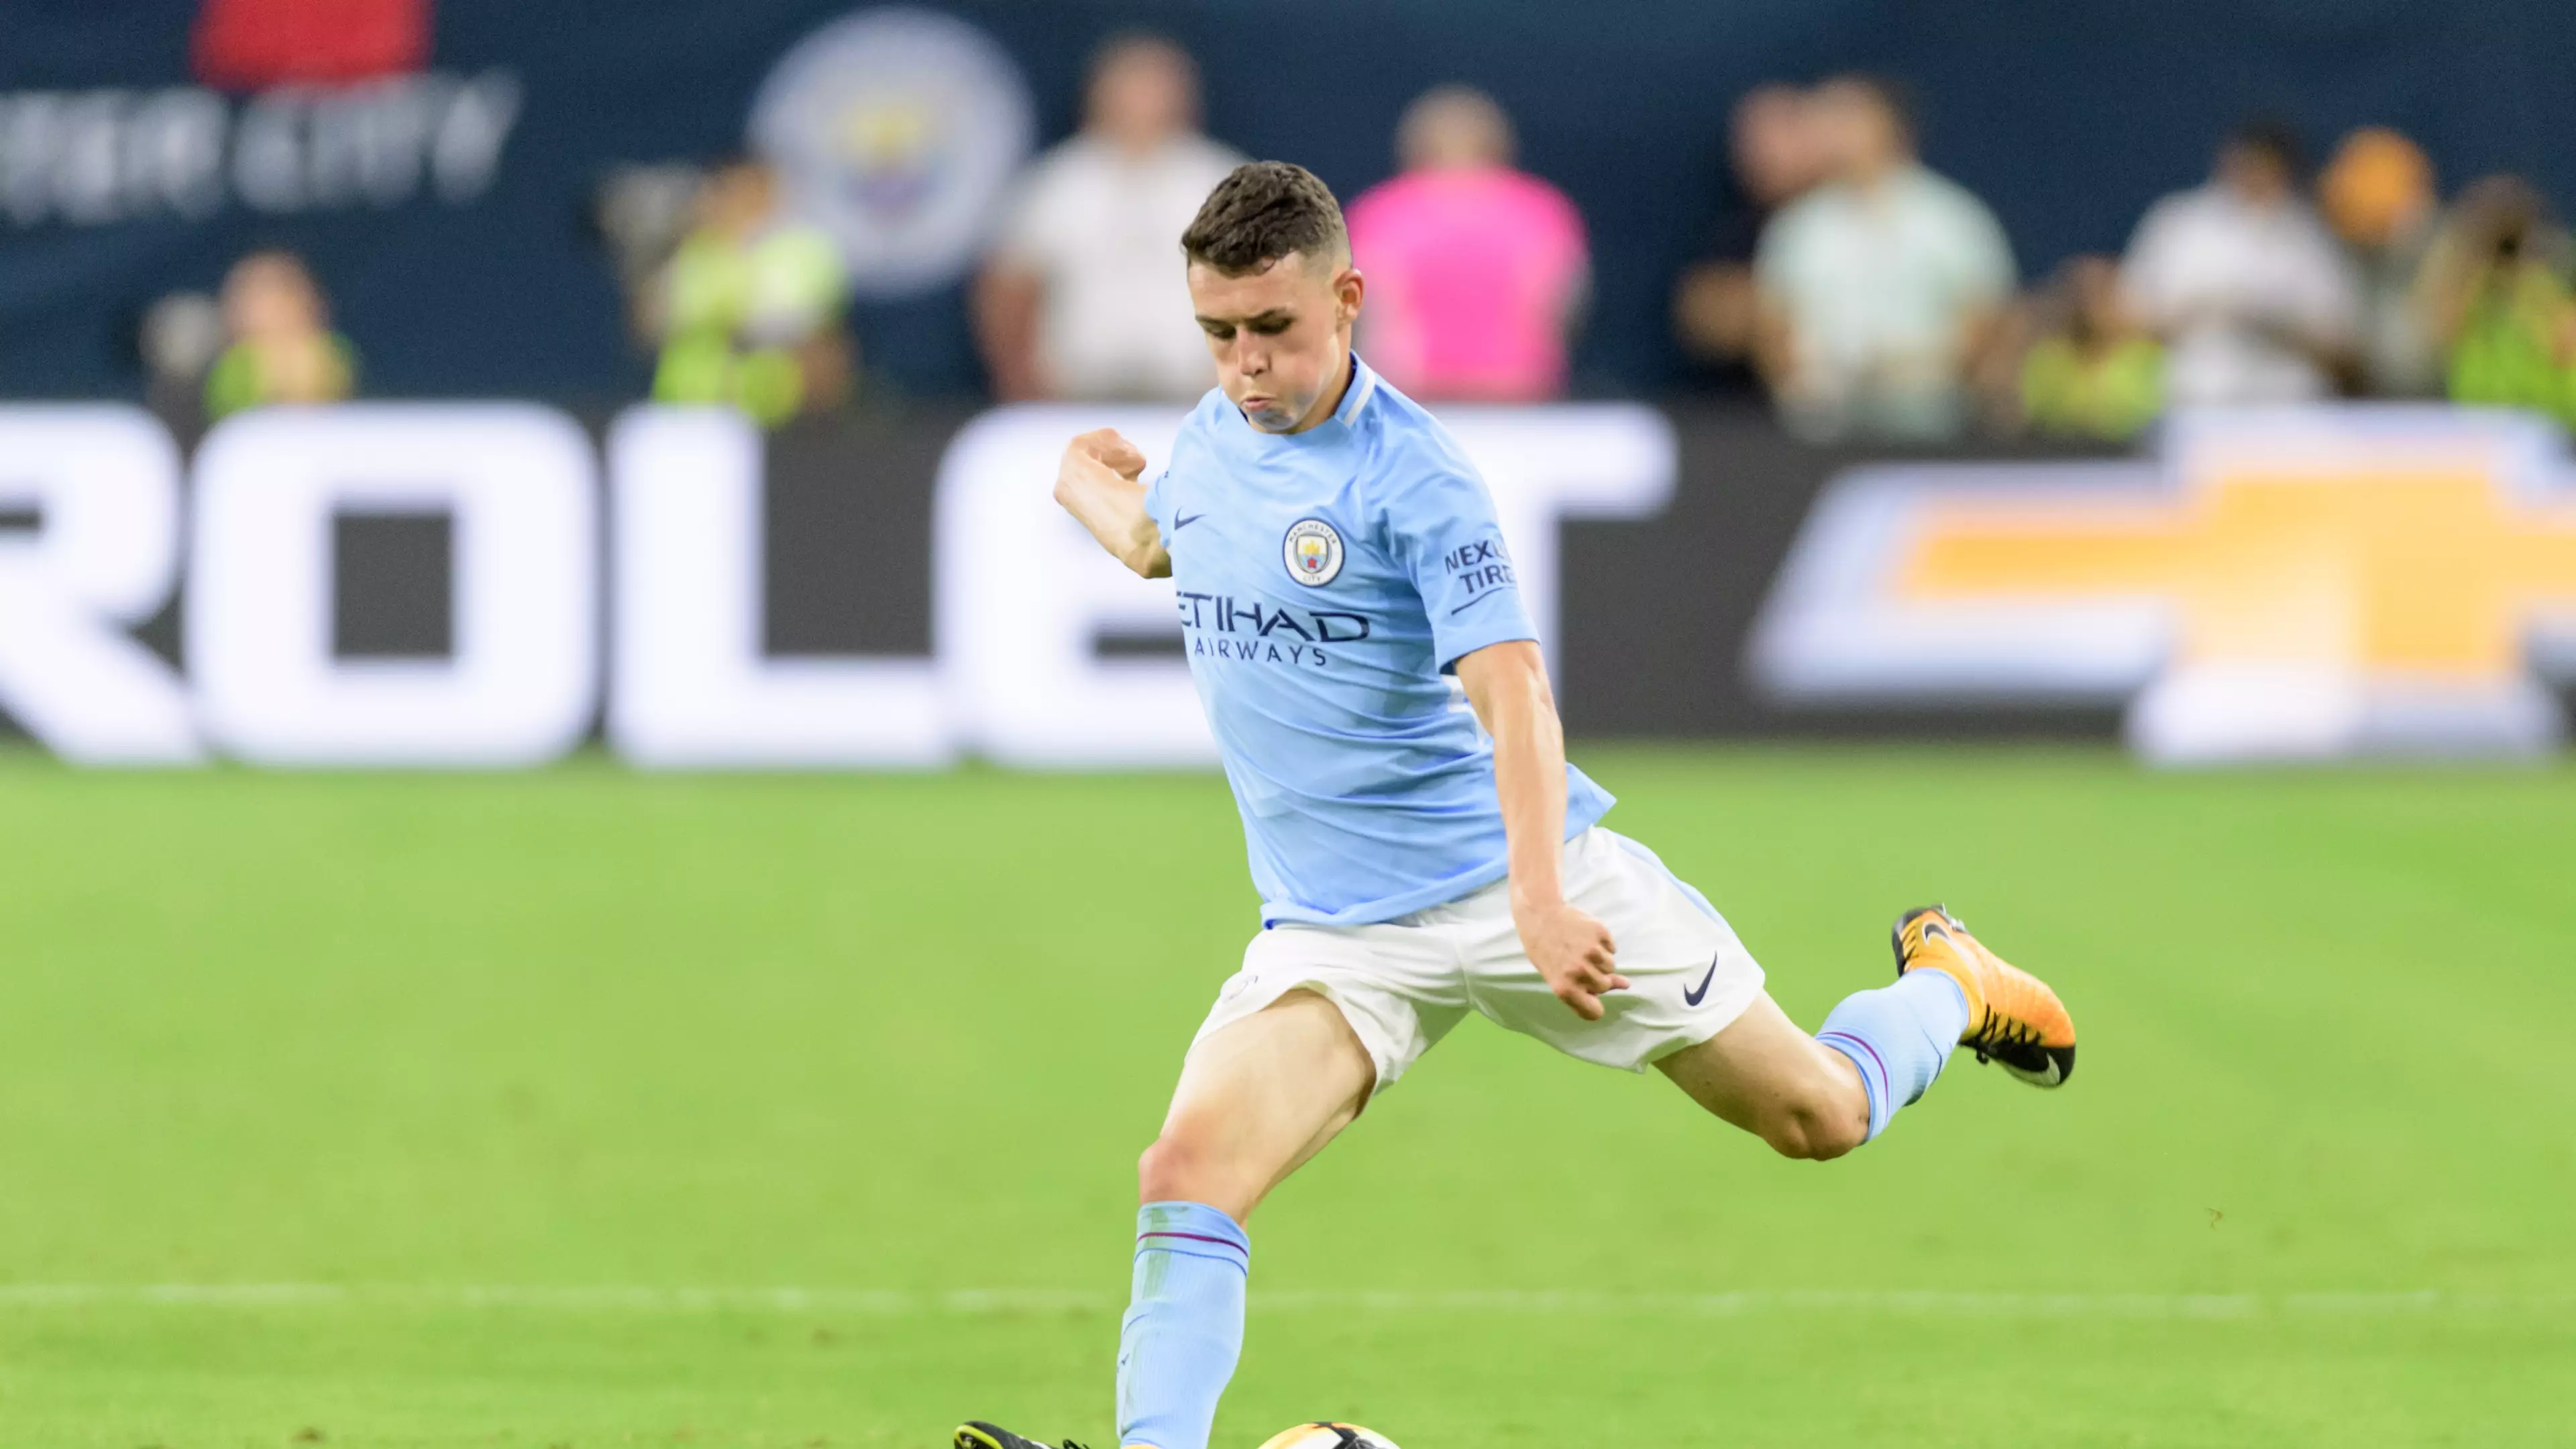 Phil Foden: A Special Young Player With A Bright Future Ahead